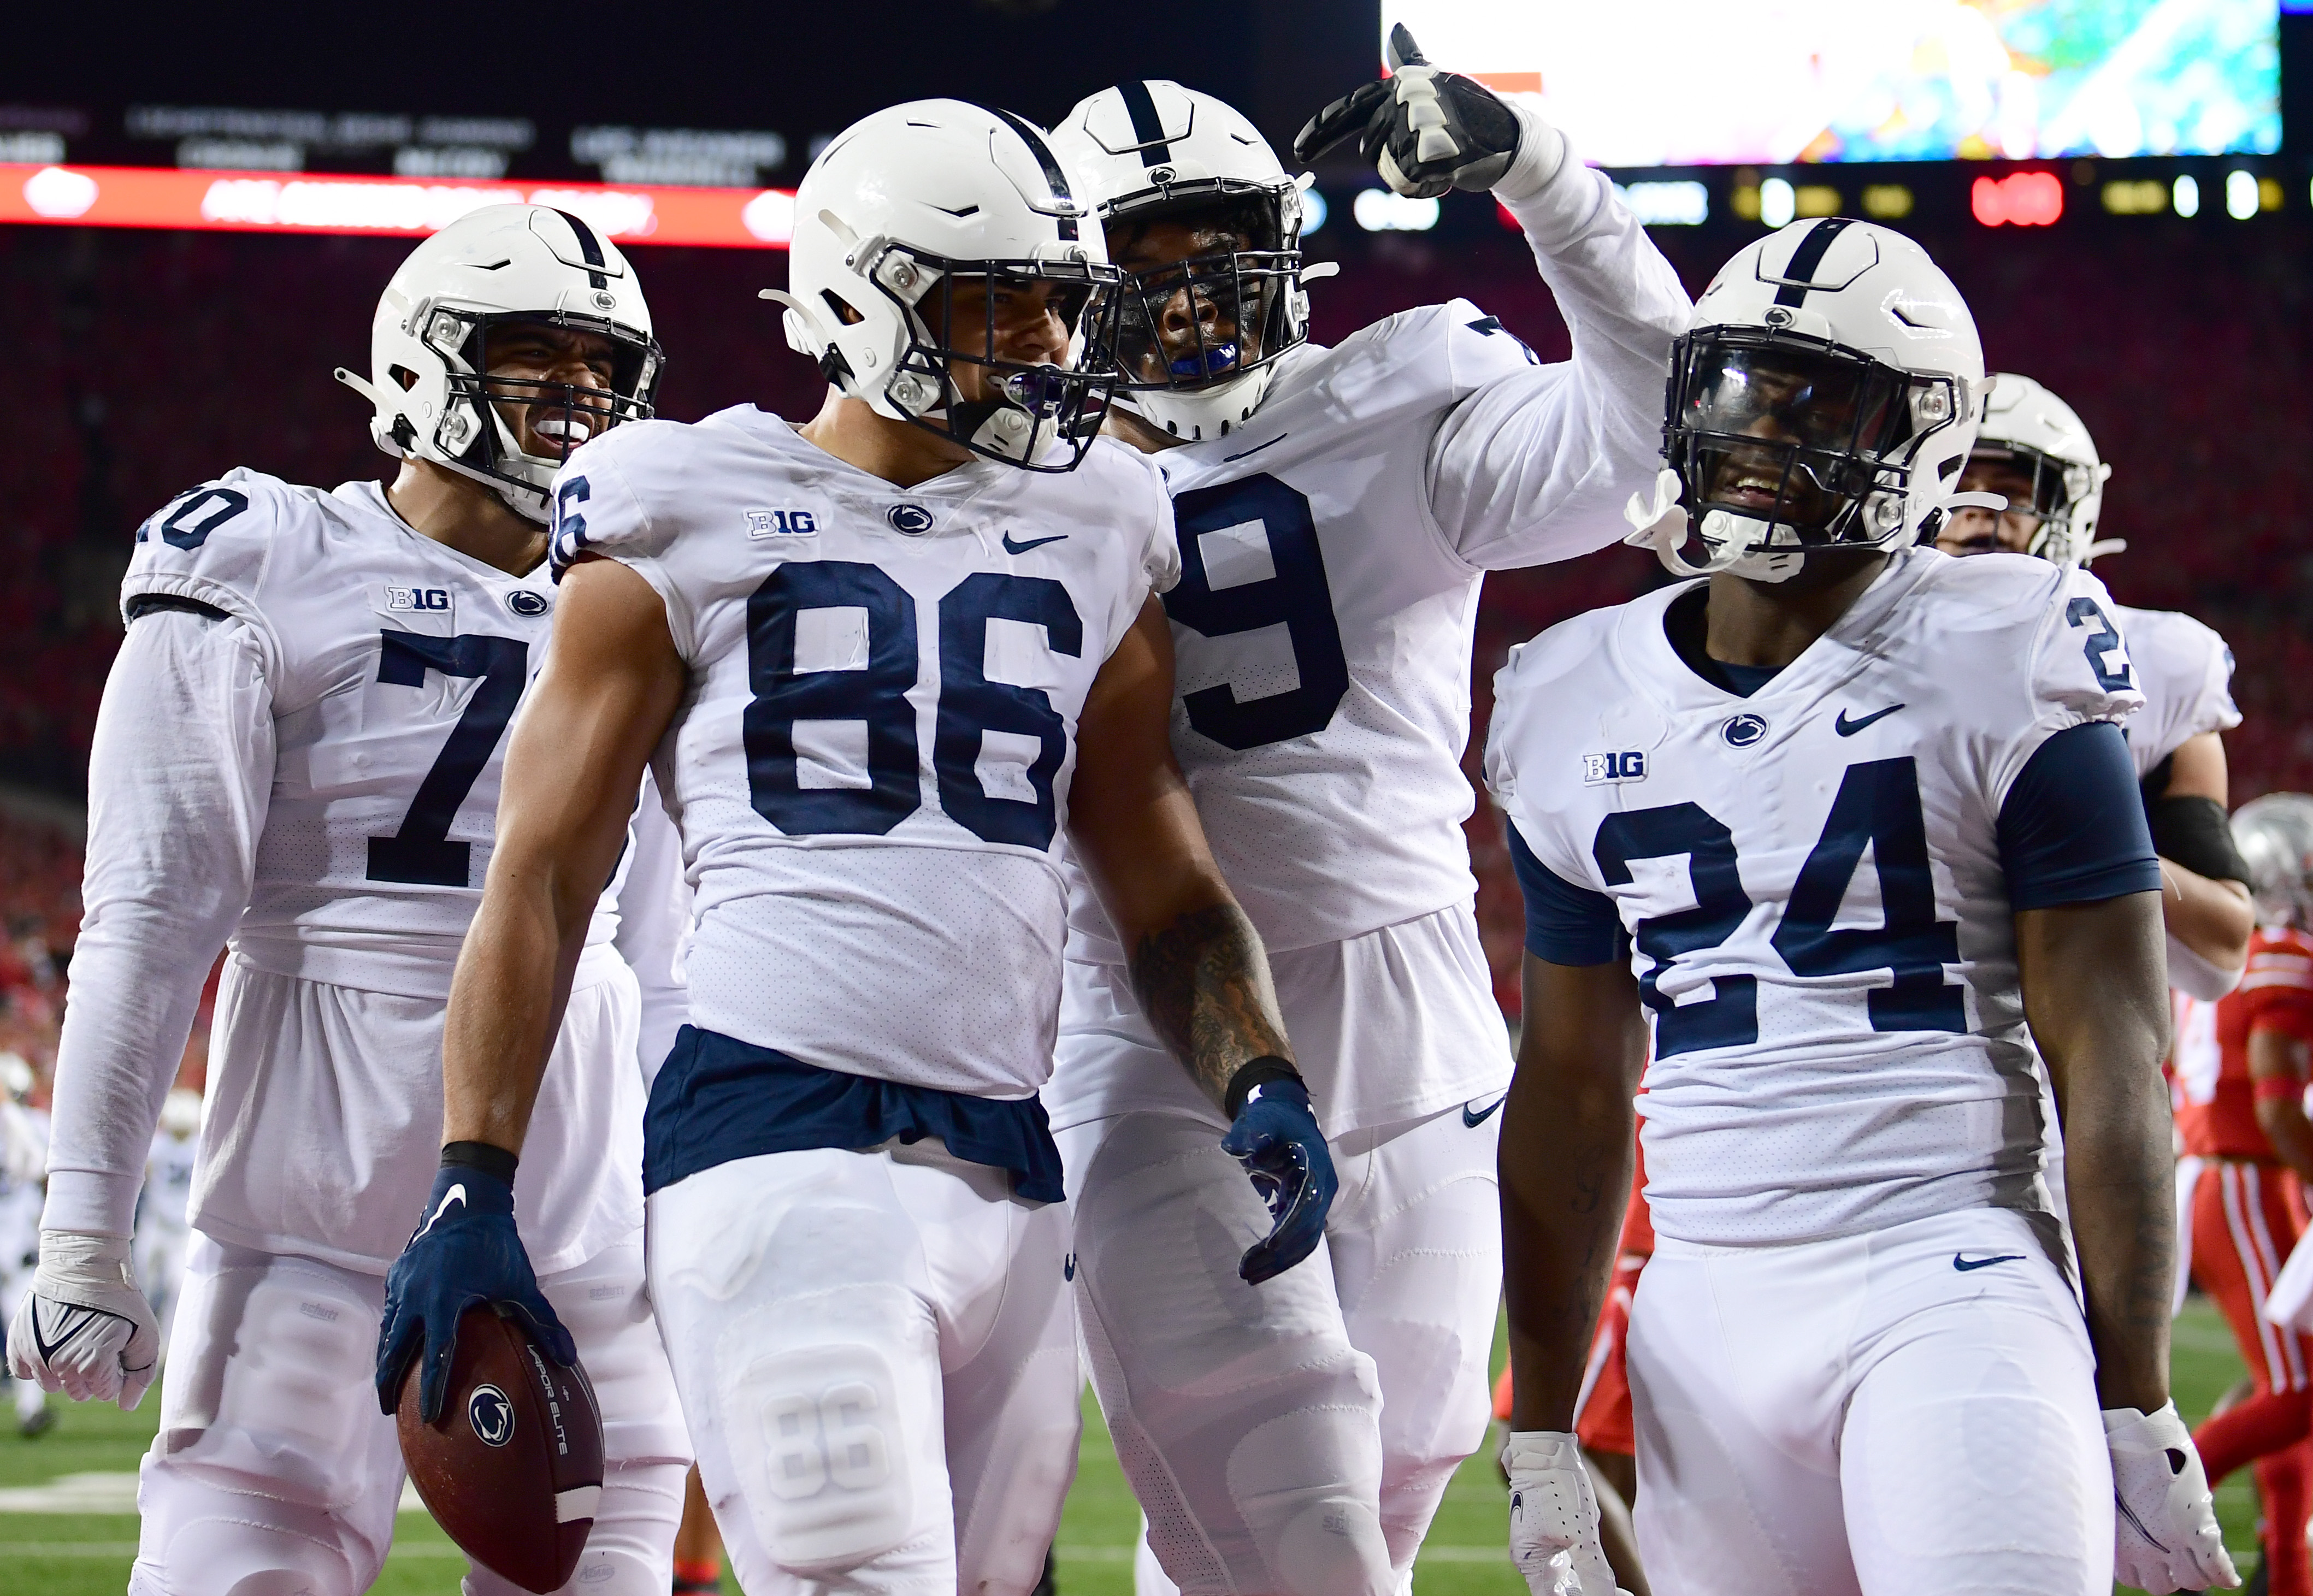 Brenton Strange #86 of the Penn State Nittany Lions celebrates his touchdown against the Ohio State Buckeyes during the first half of their game at Ohio Stadium on October 30, 2021 in Columbus, Ohio.